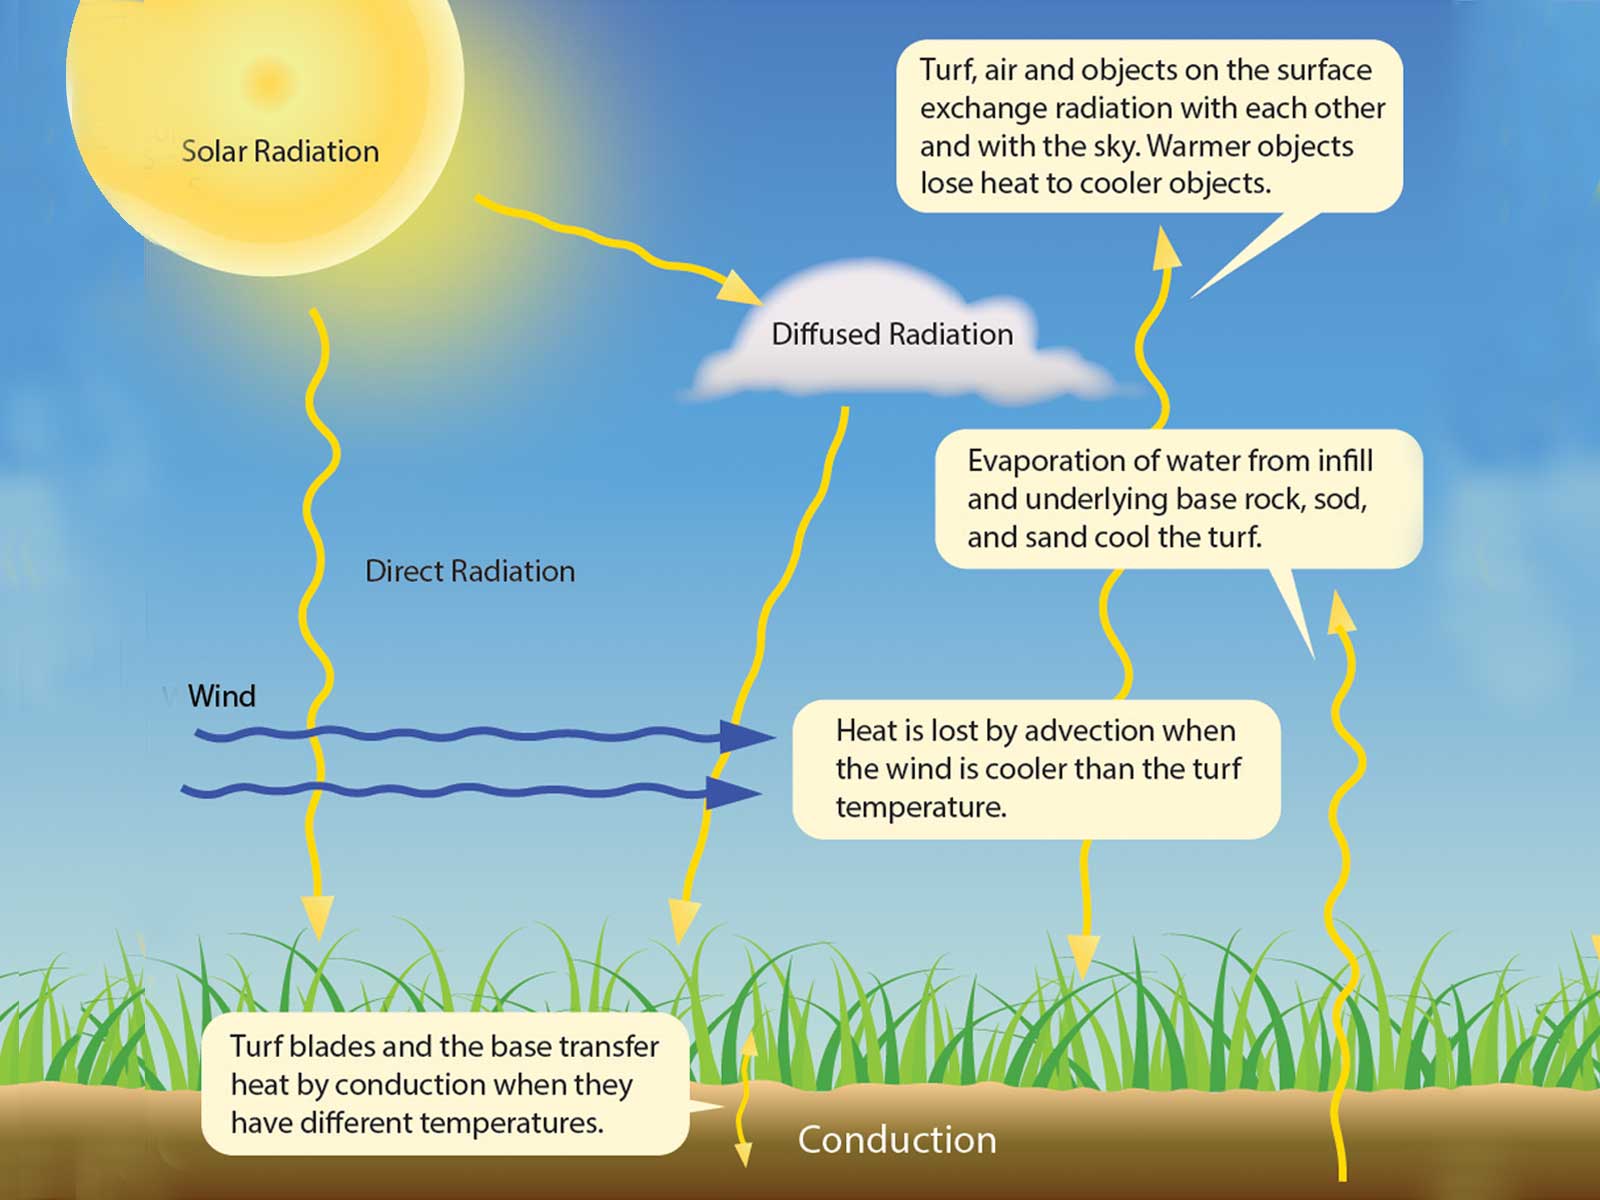 Heat can be transferred from one object to another in four ways: conduction, convection, advection, and radiation.